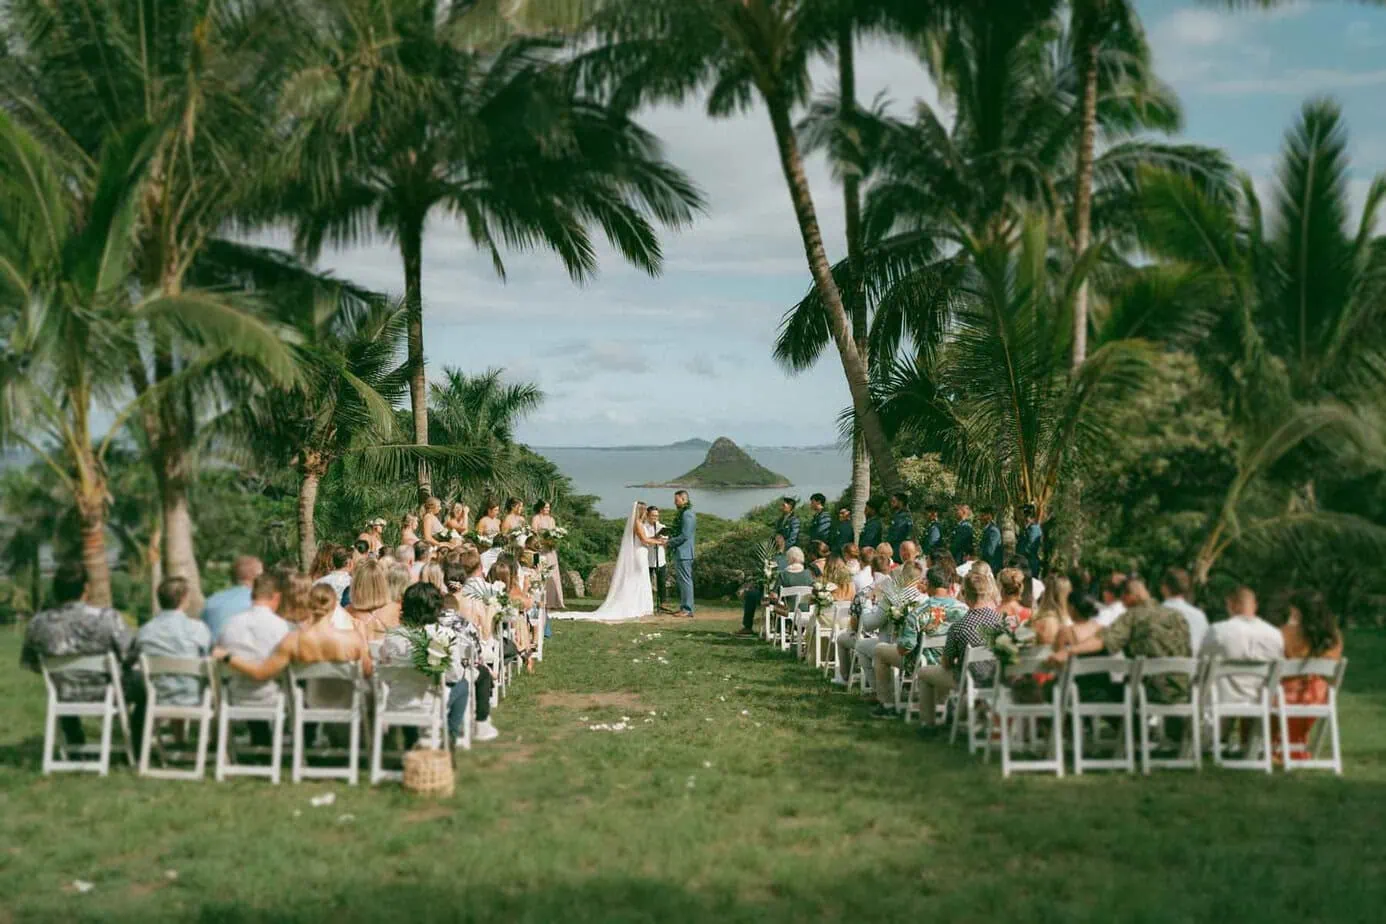 a wedding ceremony in the middle of a tropical setting